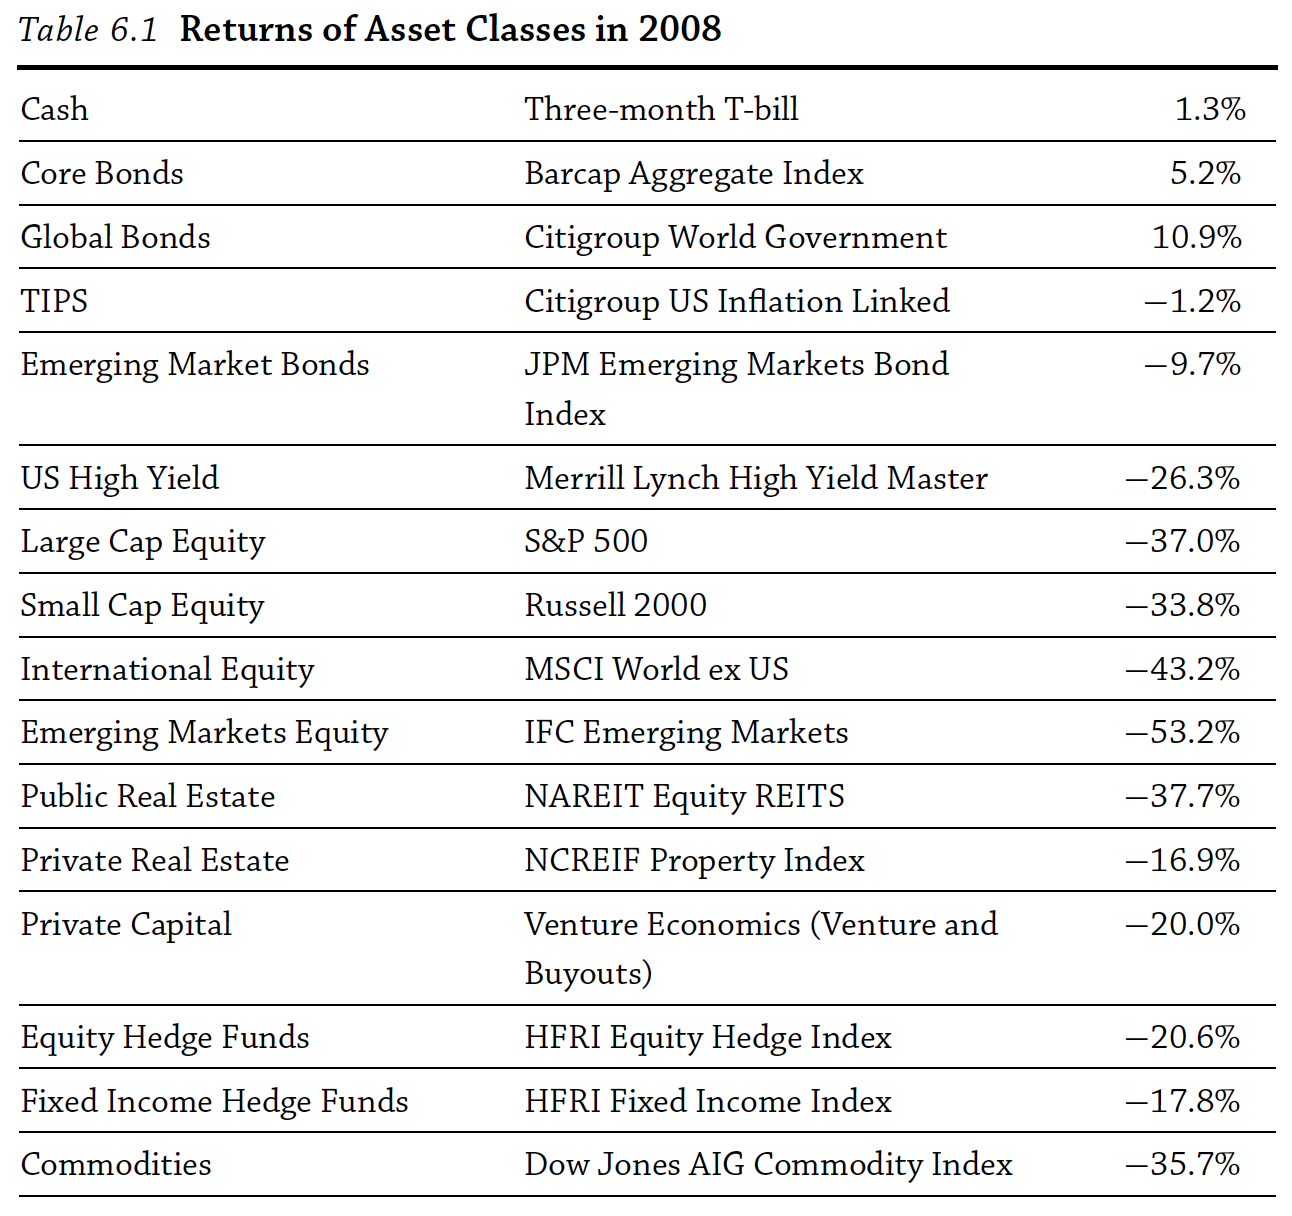 Almost everything went down during the financial crisis. Source: @ang2014